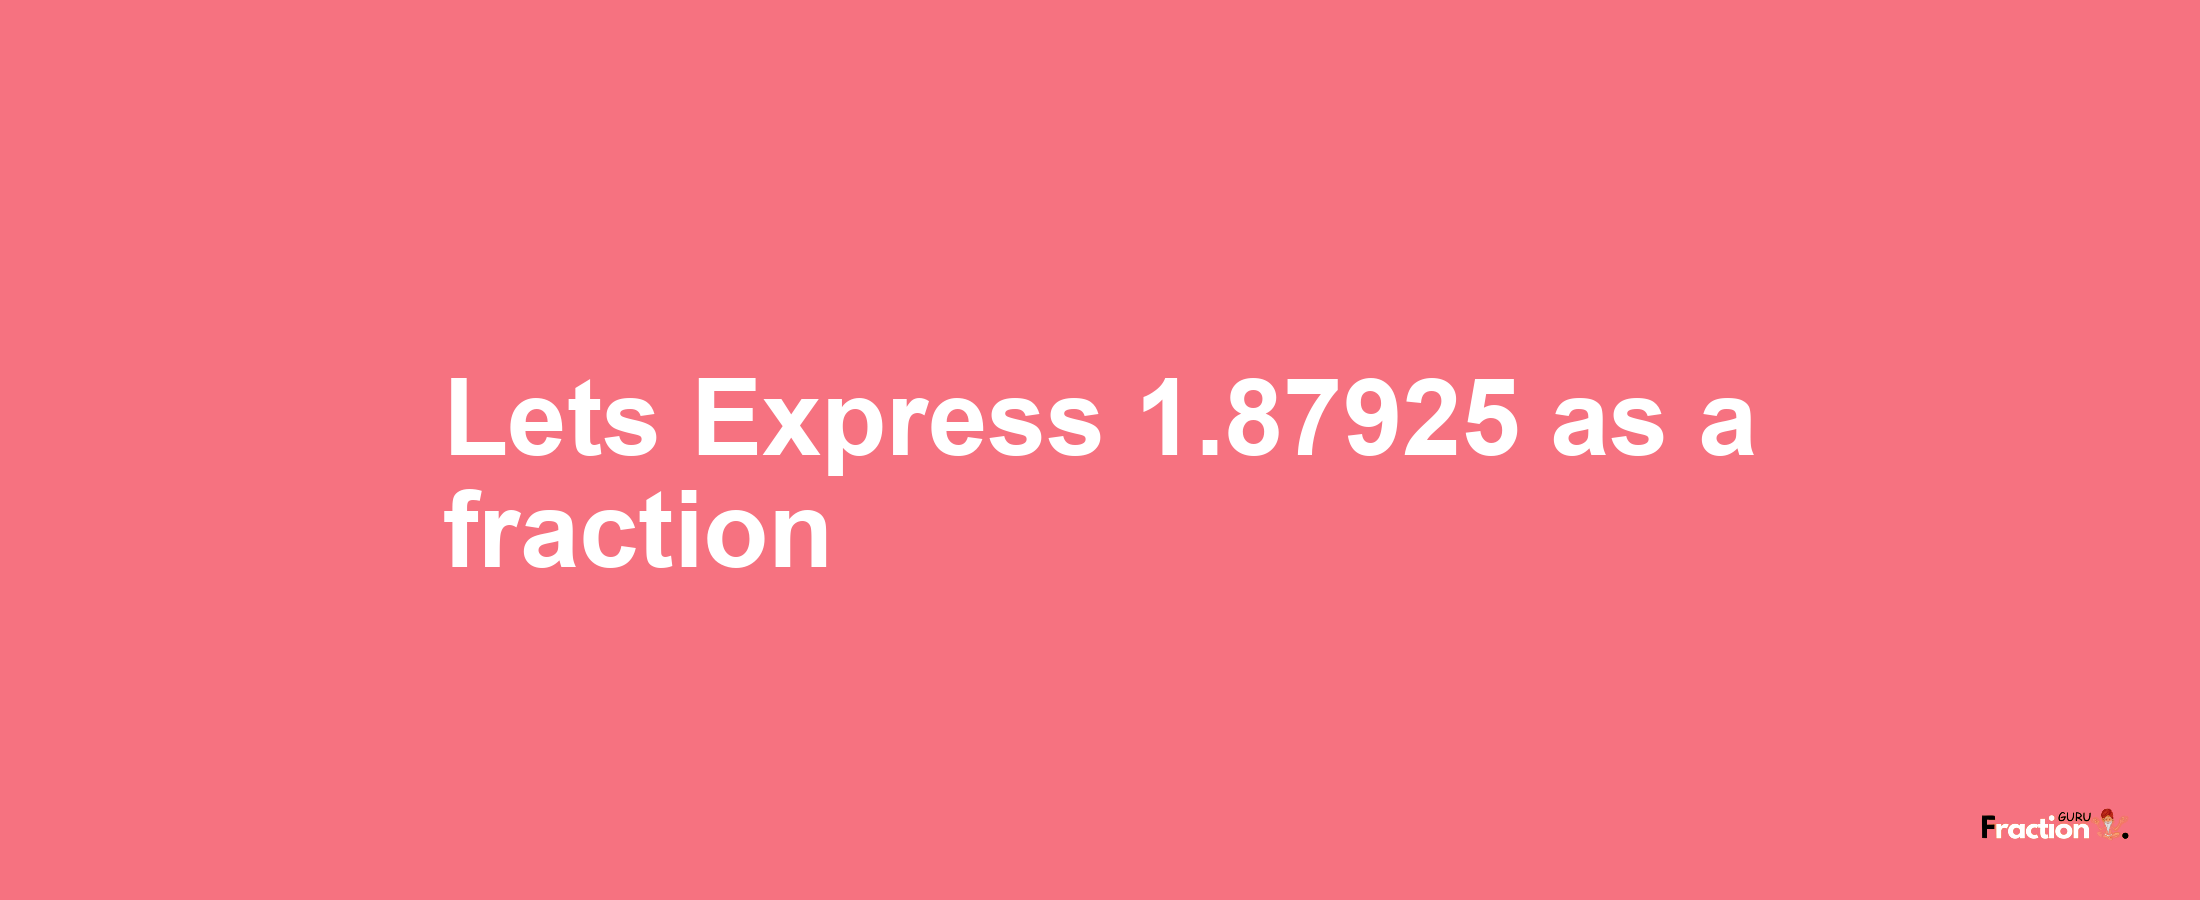 Lets Express 1.87925 as afraction